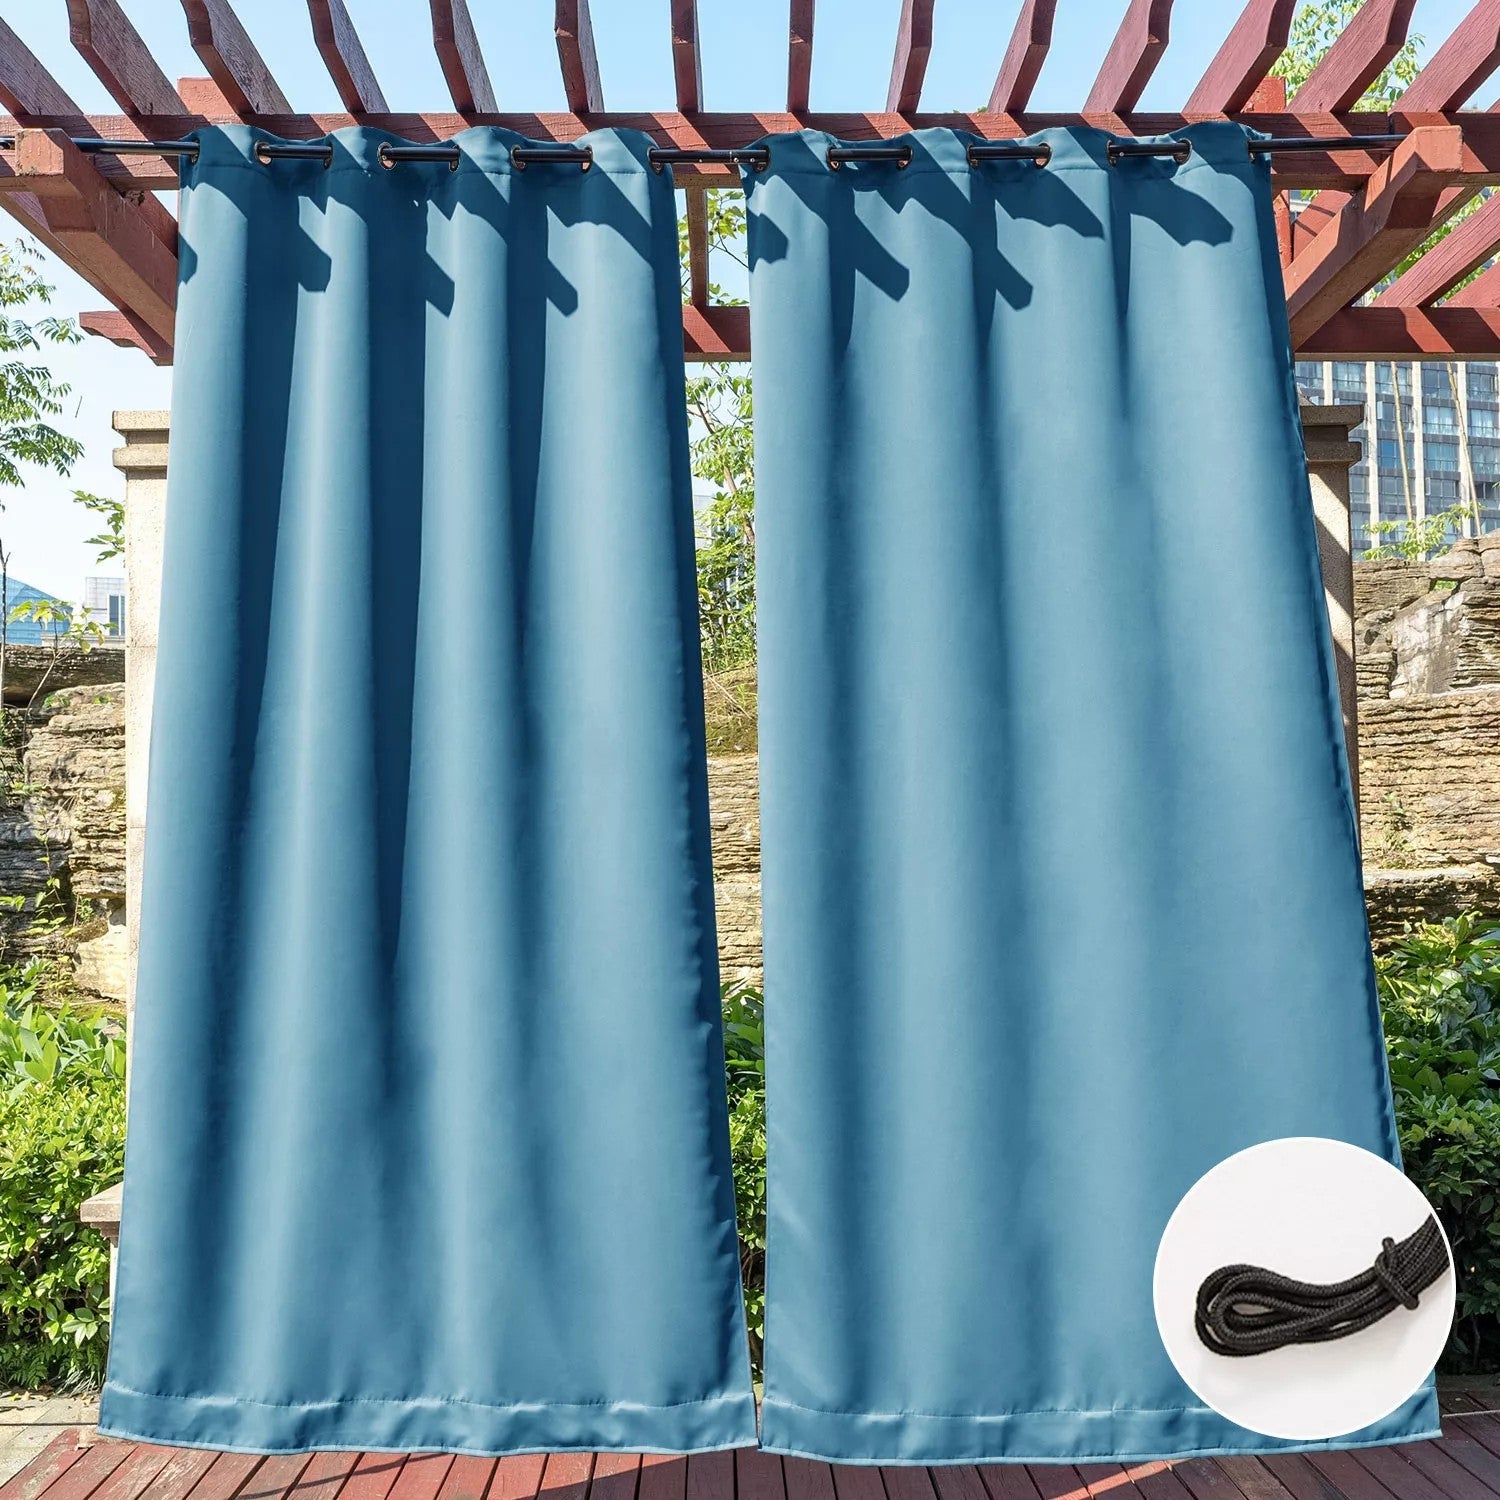 Grommet & Rod Pocket & Back Tab Waterproof Outdoor Curtains With Ropes ...